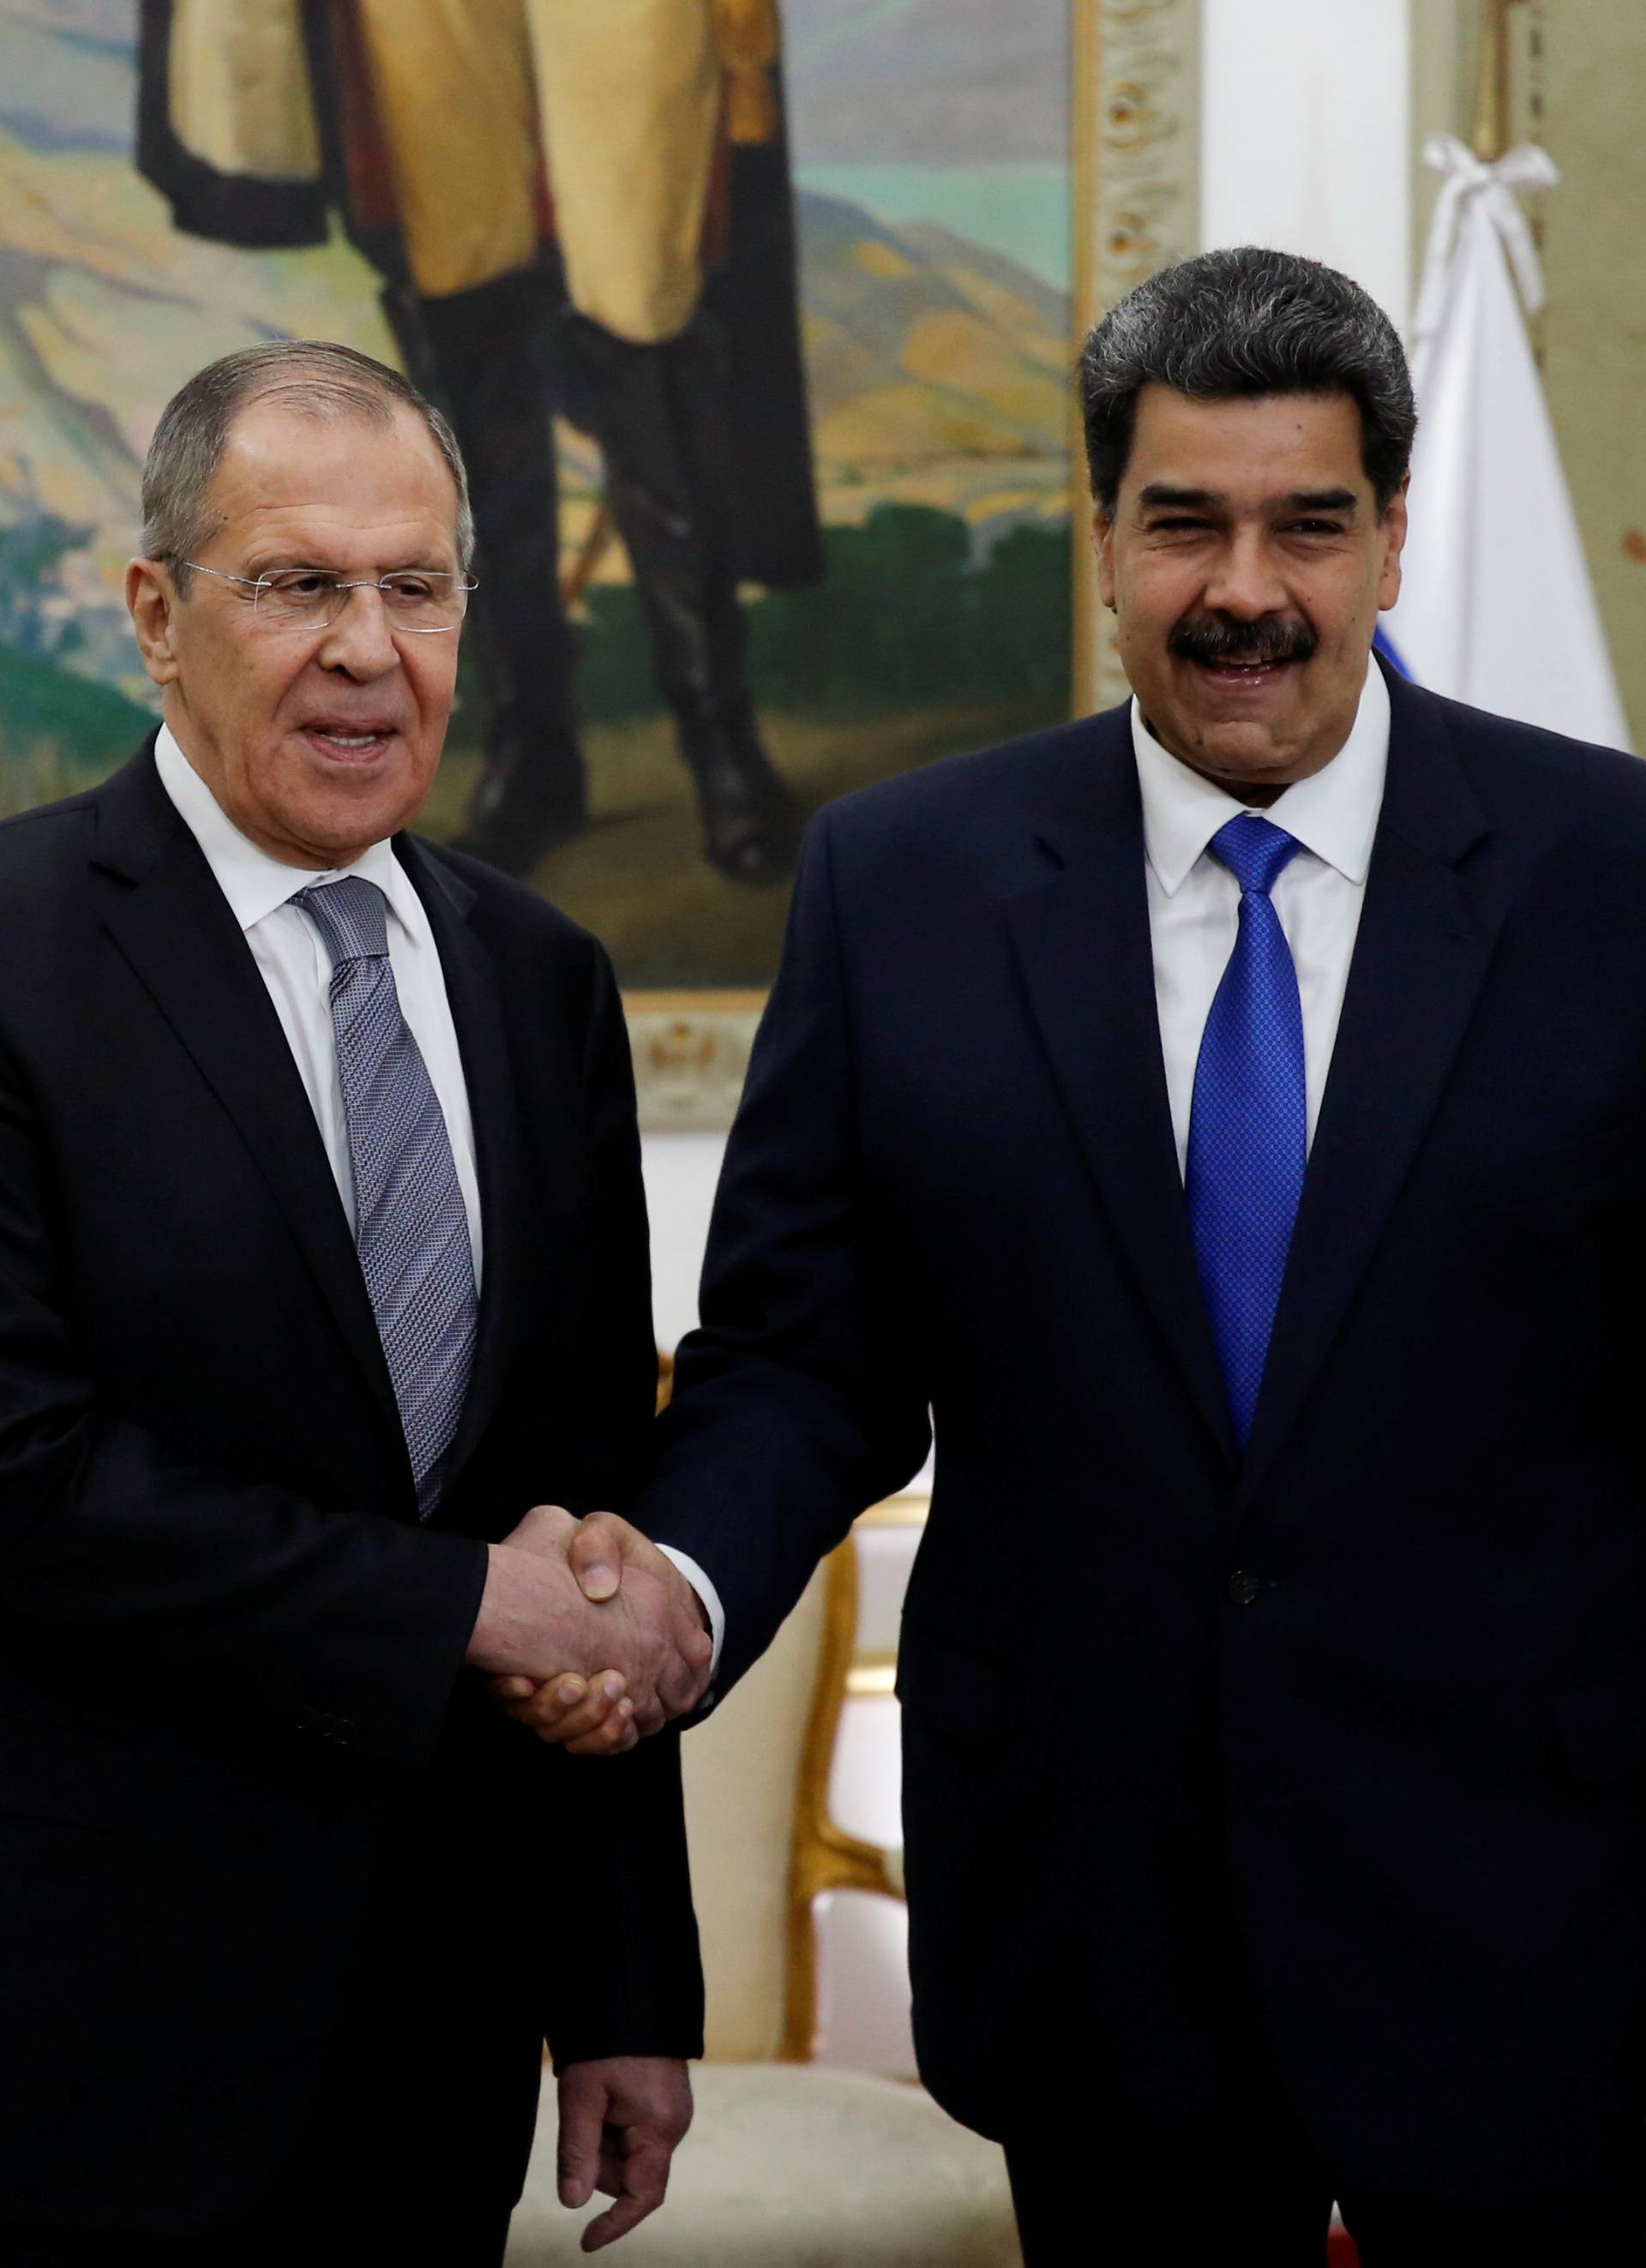 Venezuela's President Nicolas Maduro meets Russia's Foreign Minister Sergey Lavrov at Miraflores Palace in Caracas